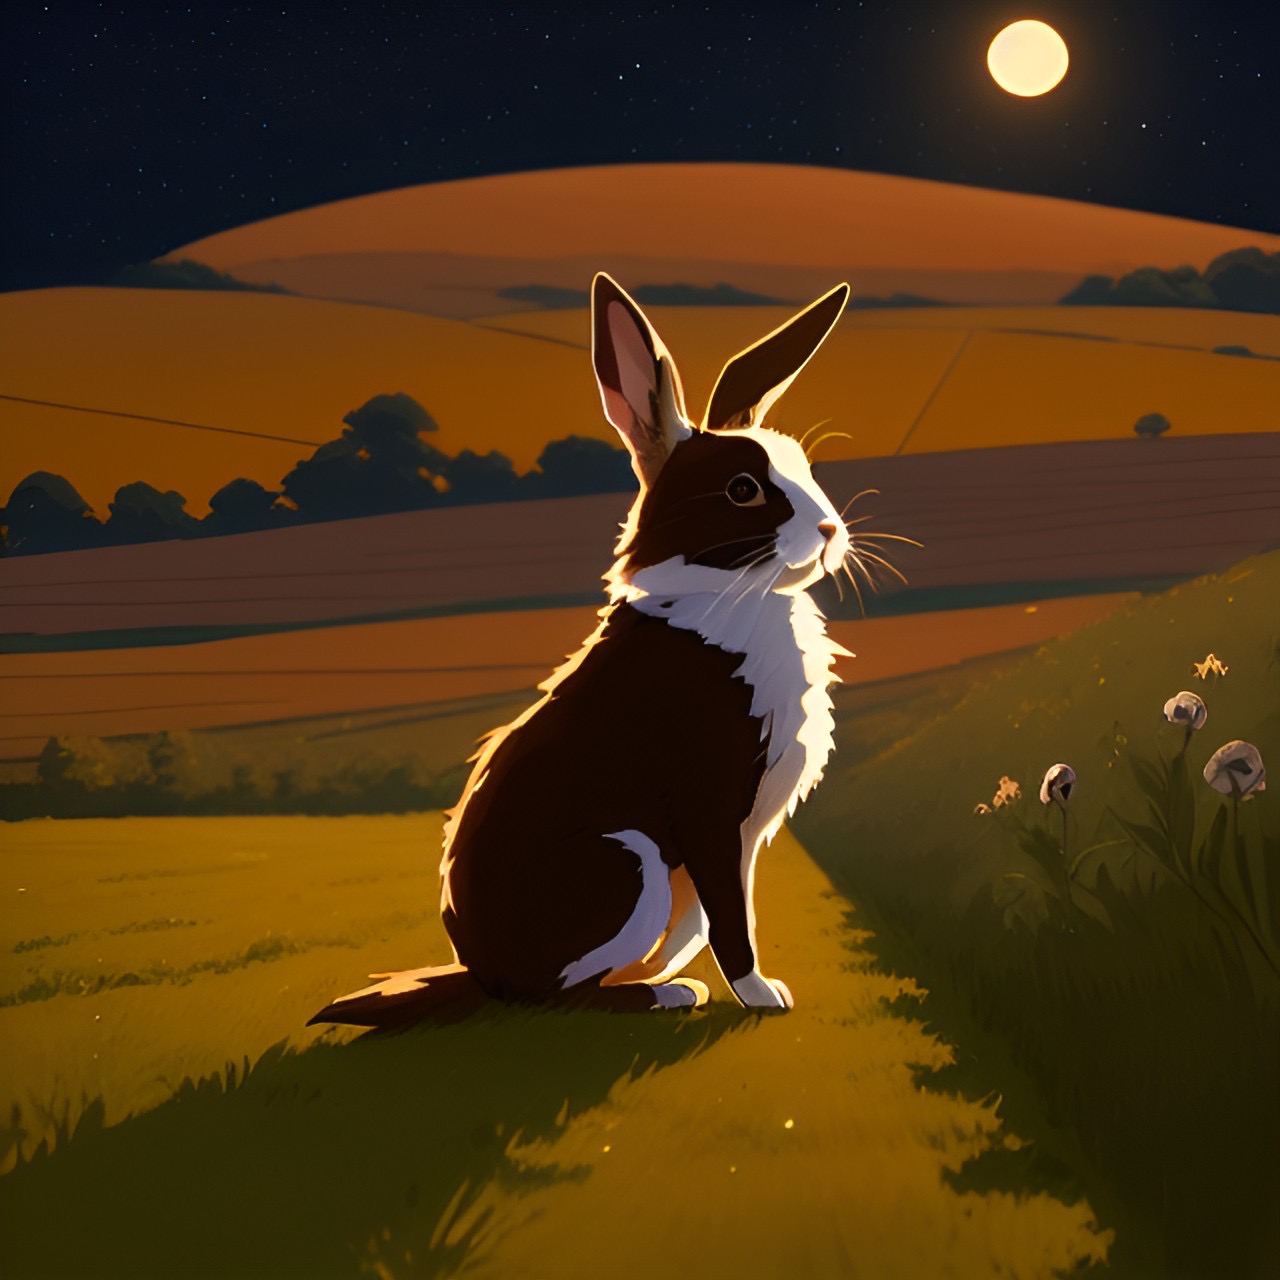 A rabbit in the countryside at night